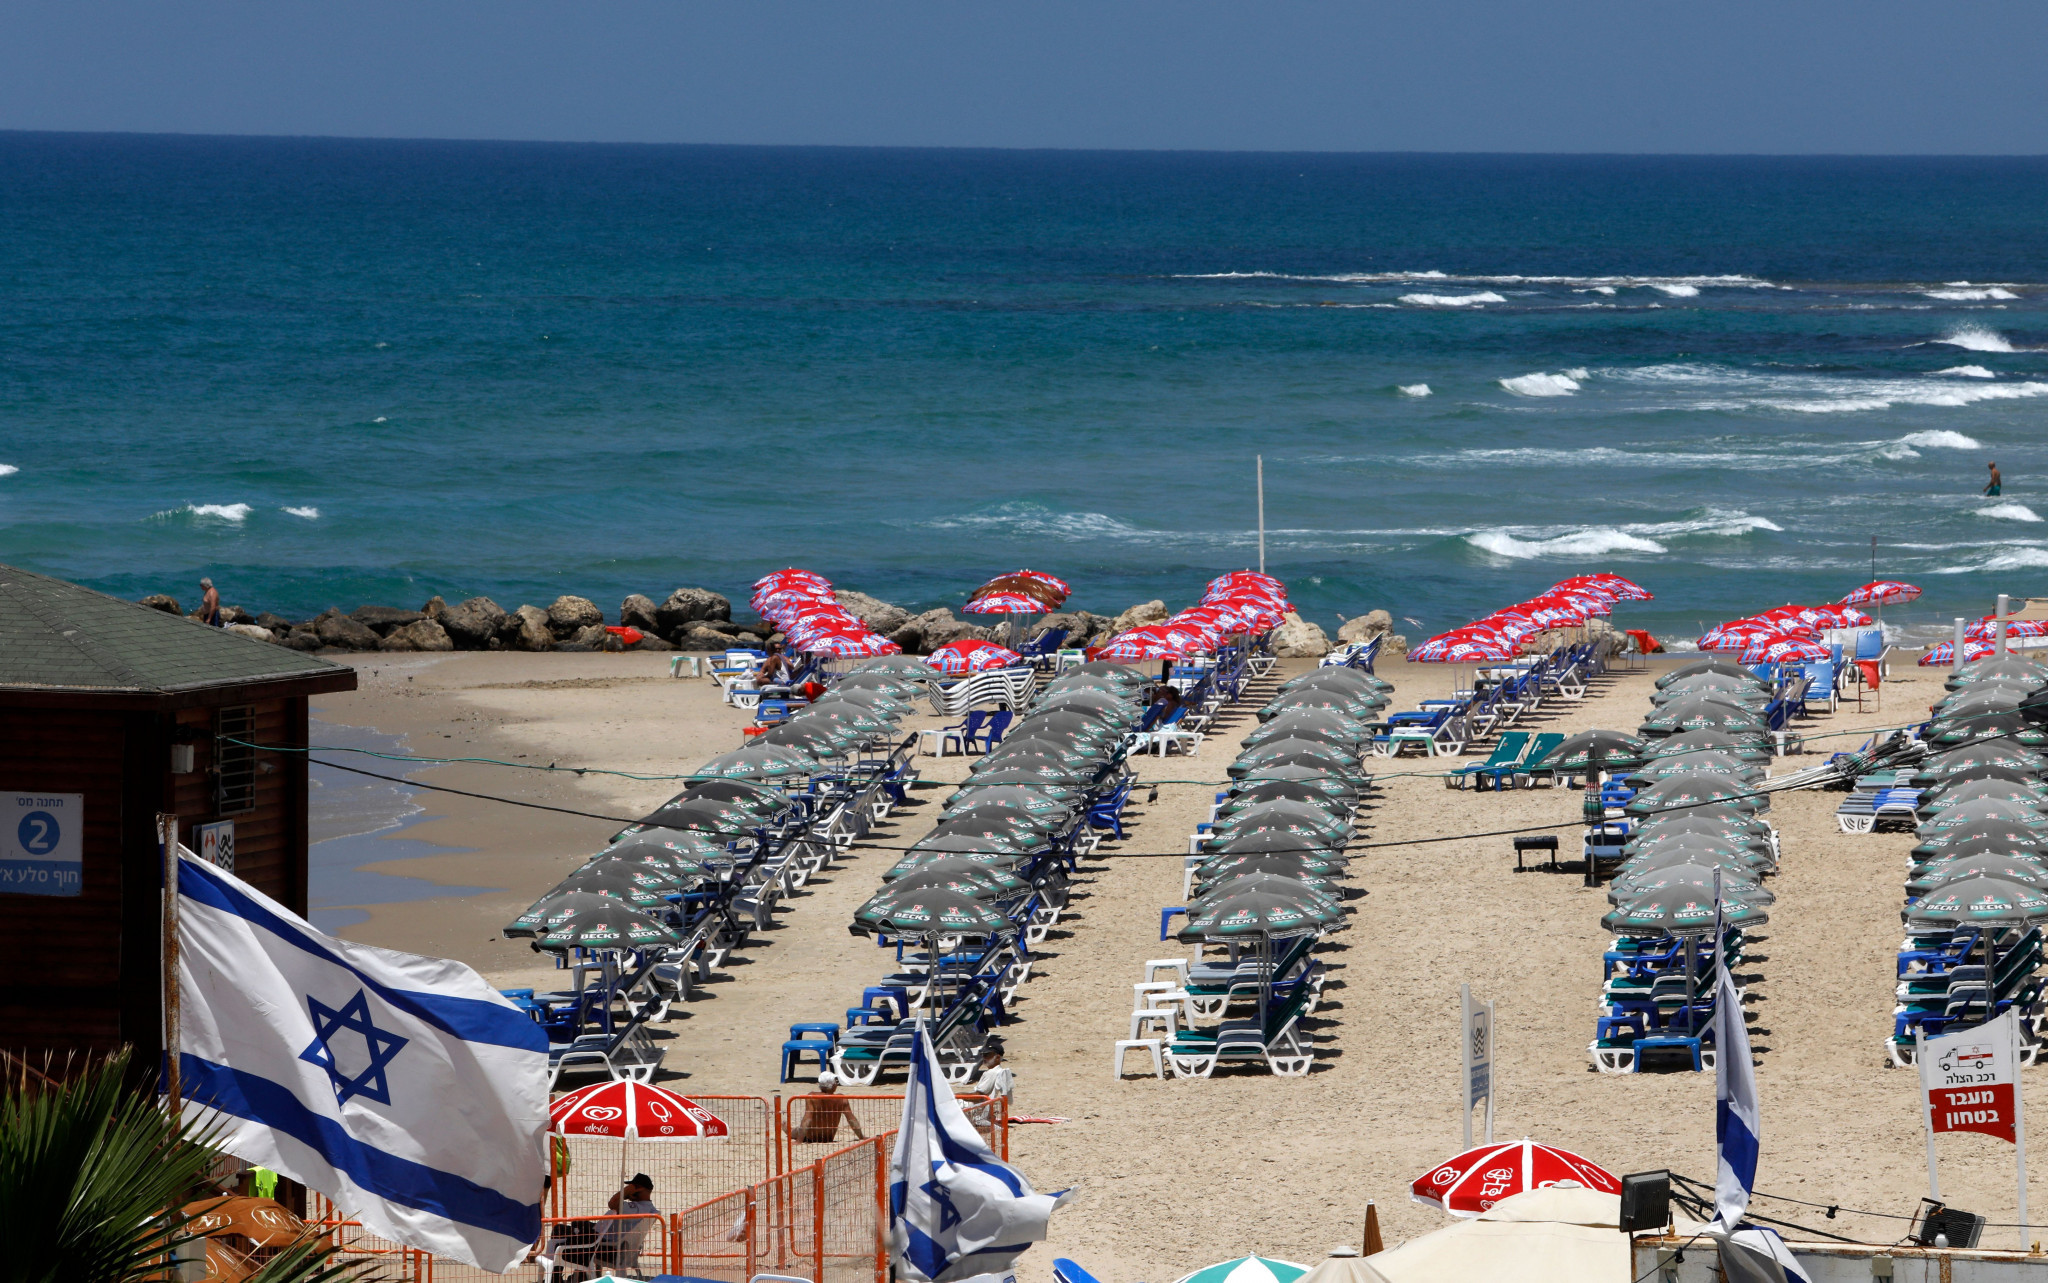 Bat Yam is the host of this year's World Beach Sambo Championships ©Getty Images